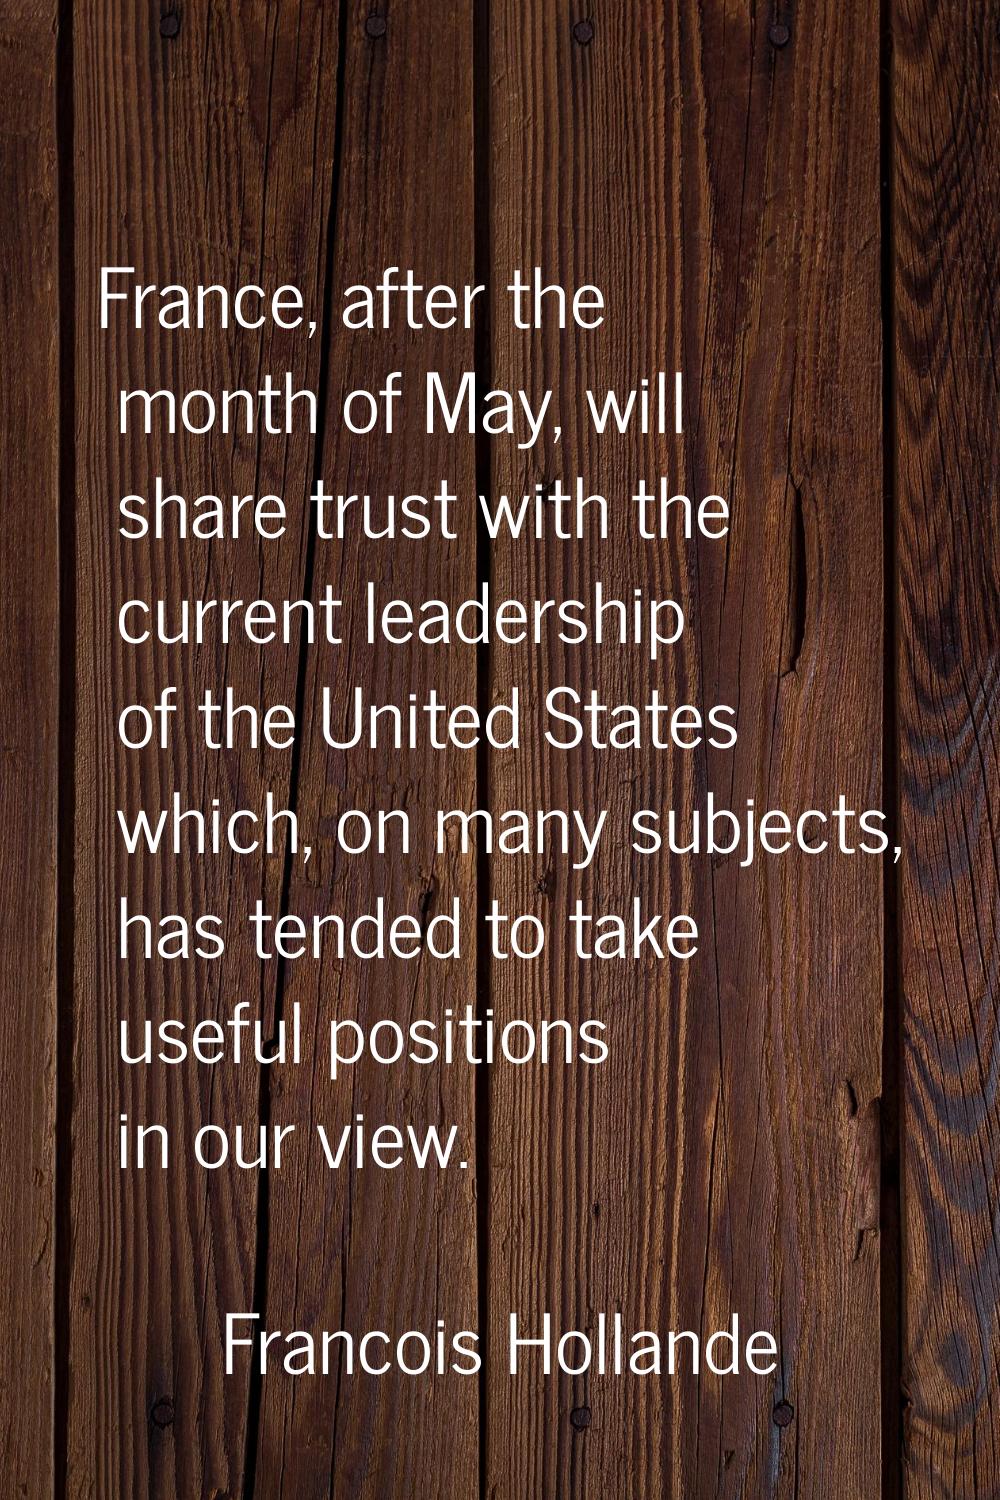 France, after the month of May, will share trust with the current leadership of the United States w